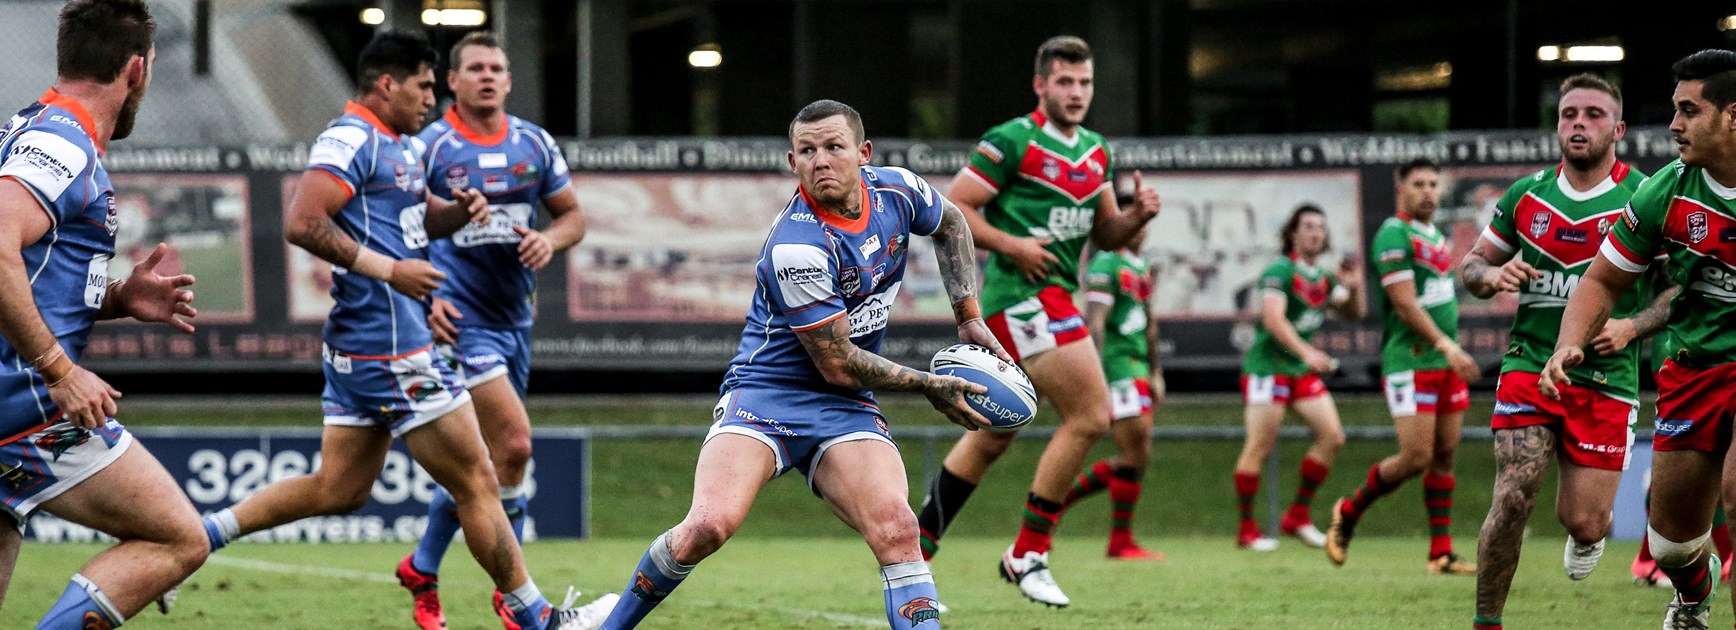 Todd Carney playing for the Northern Pride against Wynnum Manly